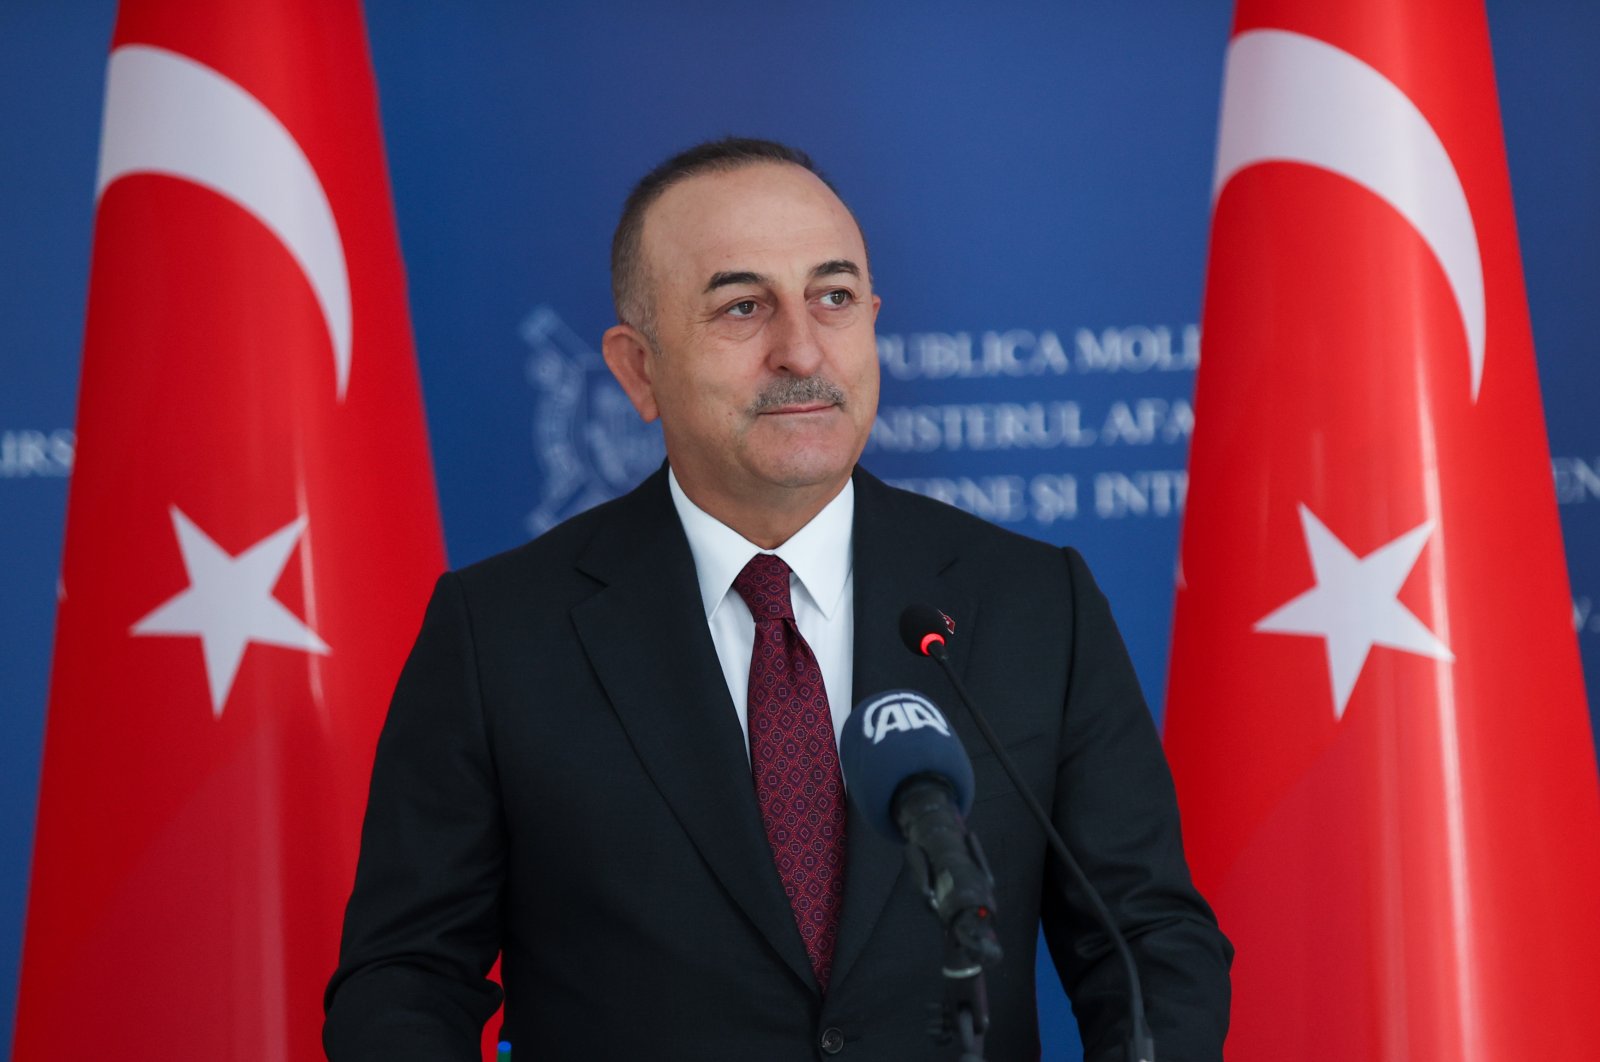 Foreign Minister Mevlüt Çavuşoğlu is seen during a press conference with his Moldovian counterpart Nicu Popescu (not pictured), in Kishinev, Moldova, Nov. 18, 2021. (AA Photo)